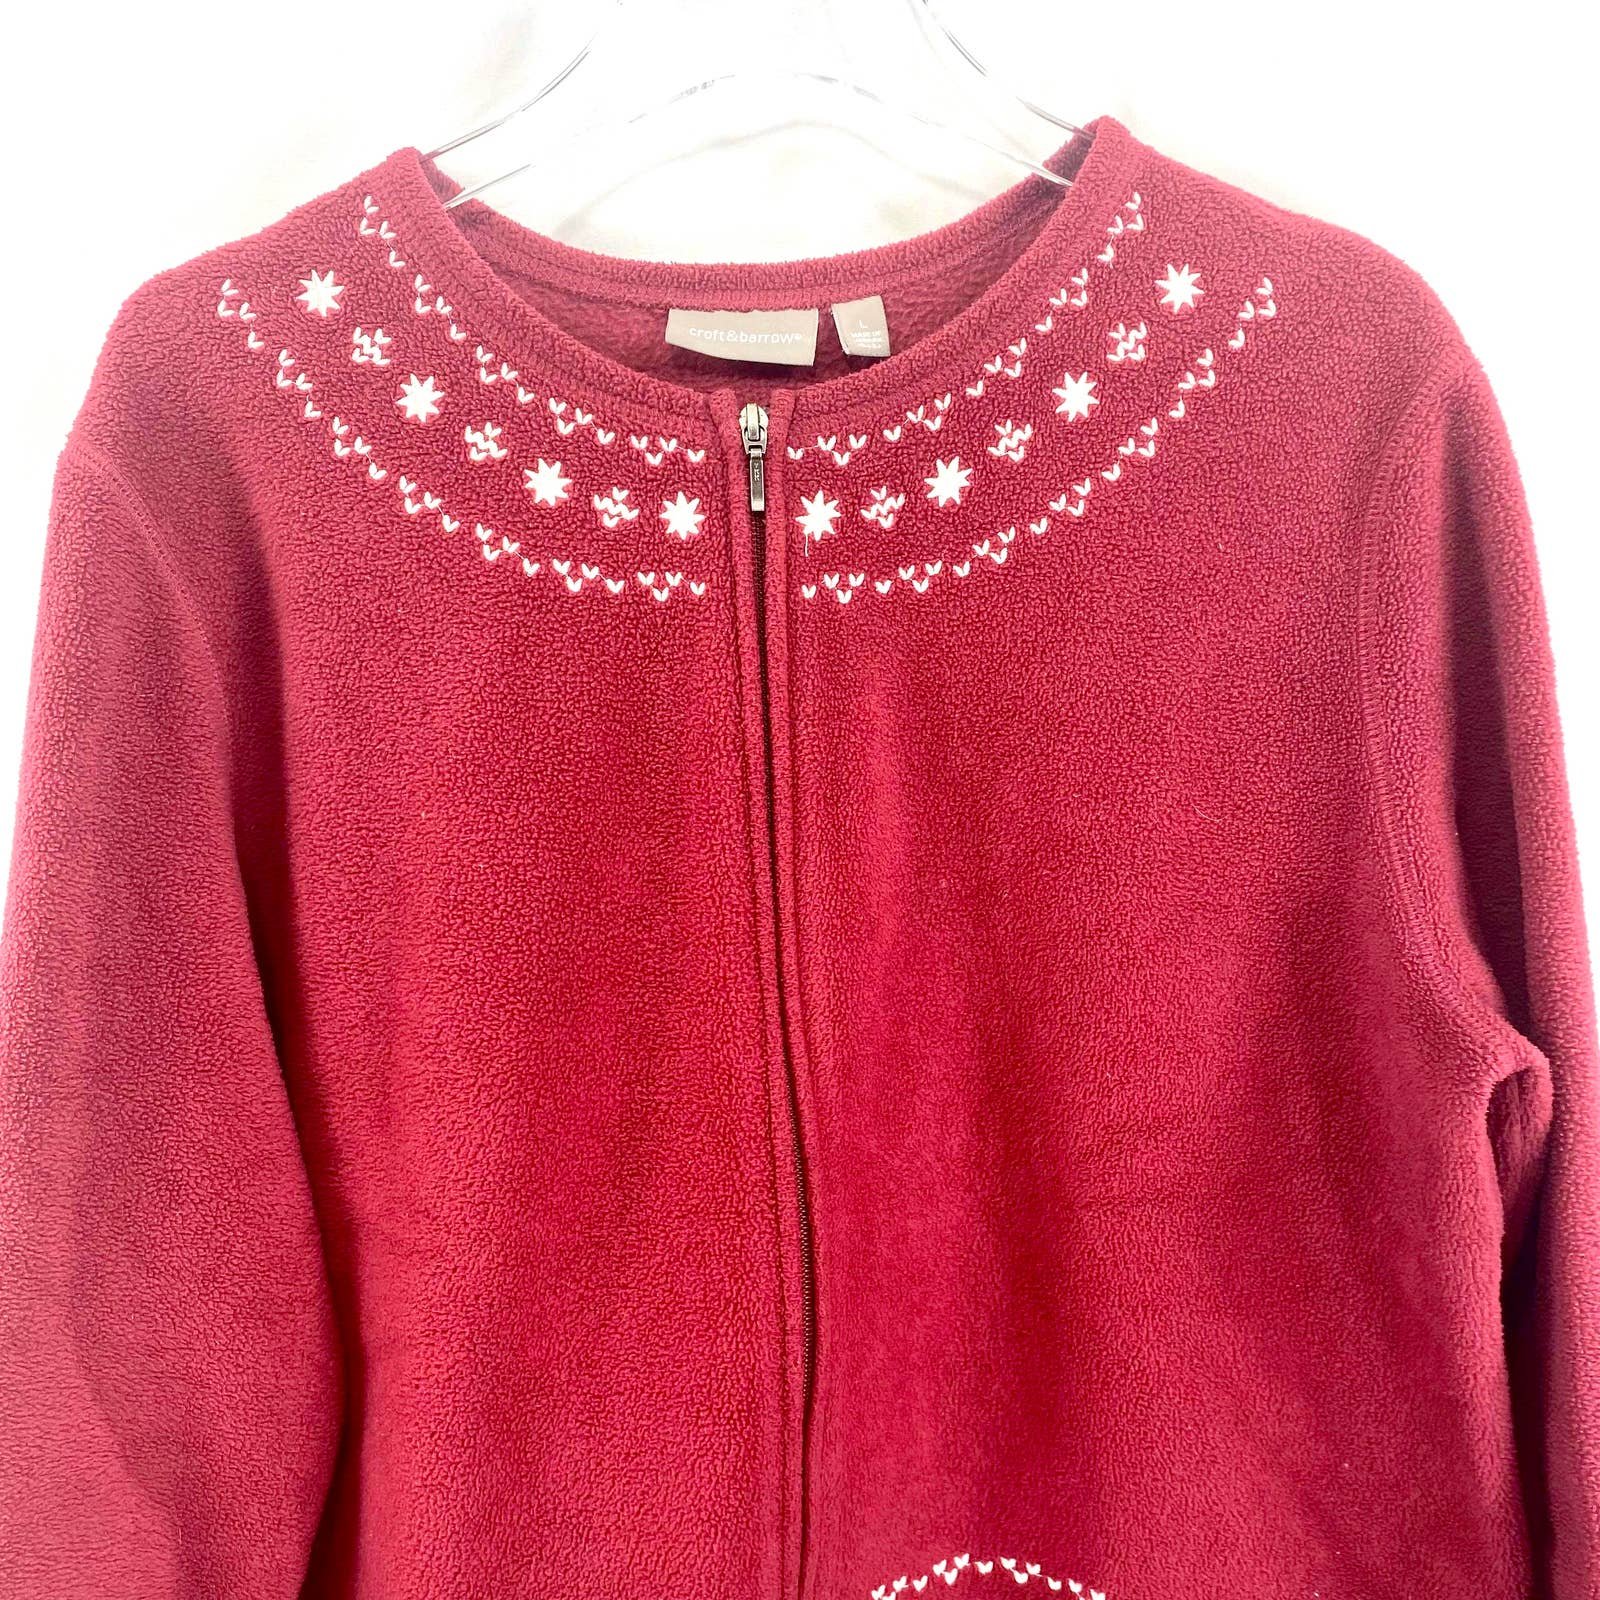 Popular CROFT & BARROW Red Zip Up Sweater with Snowflake Design fghhamHzY well sale